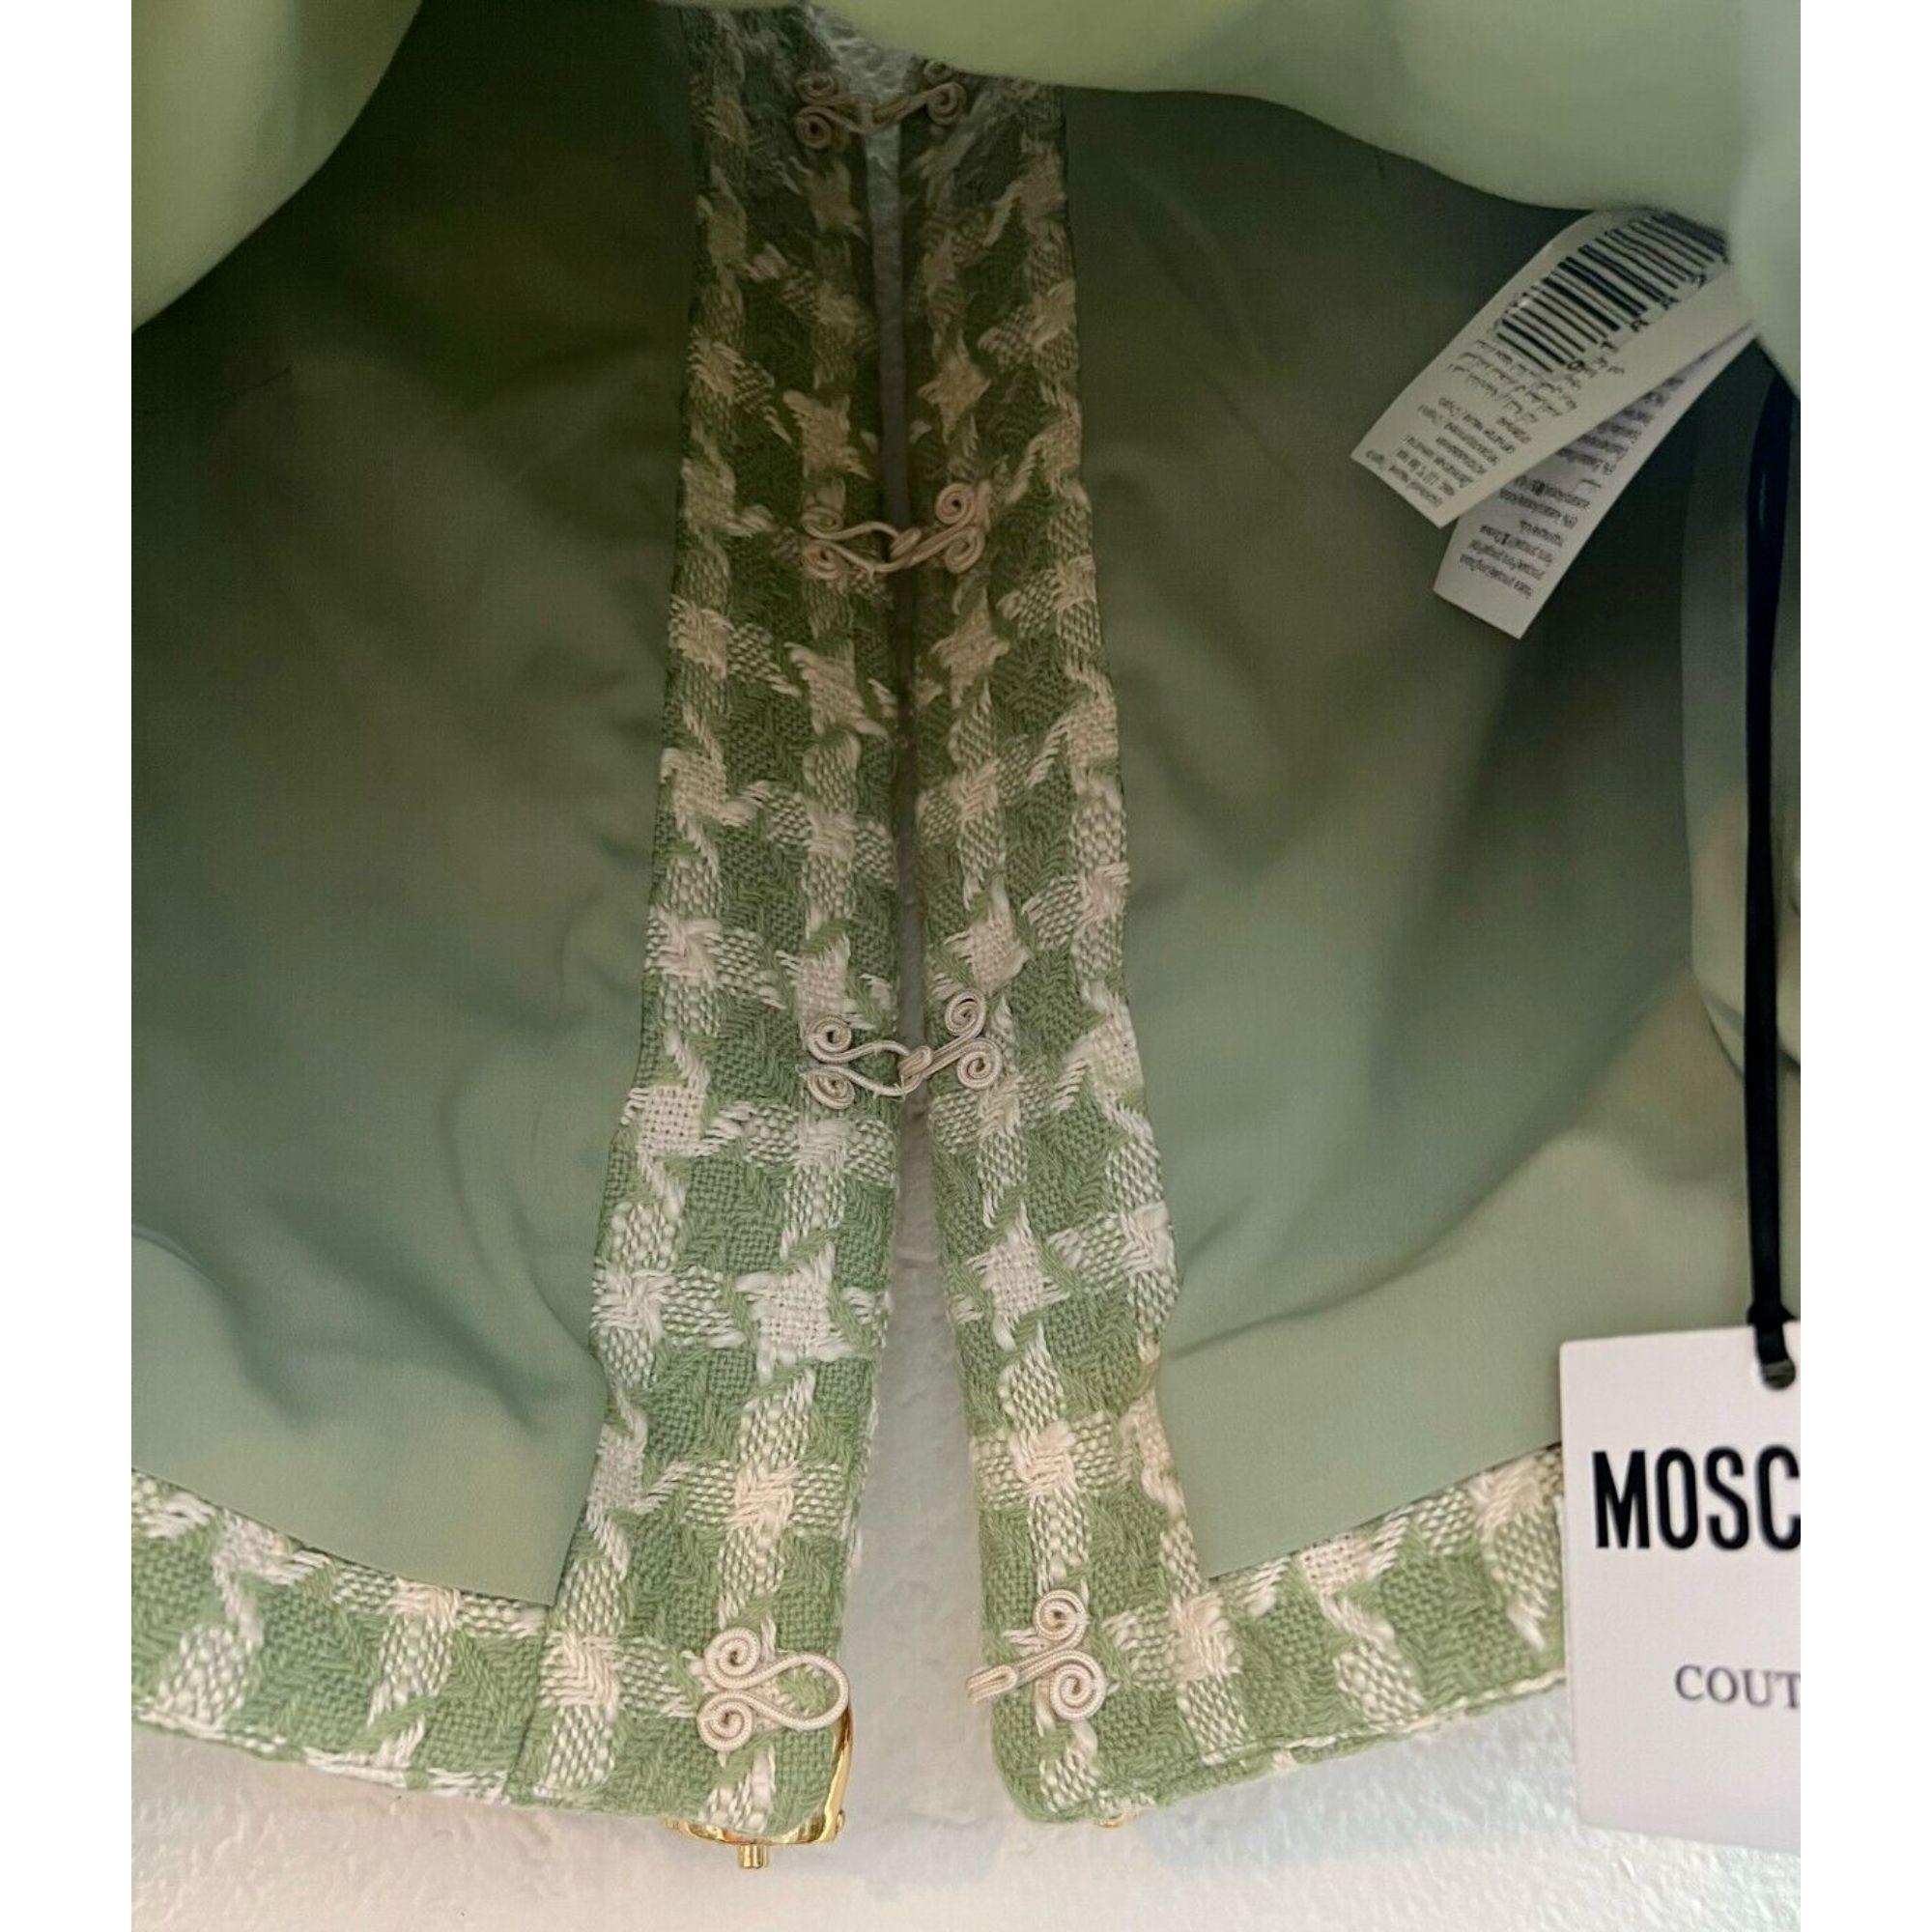 AW21 Moschino Couture Jeremy Scott Green White Wool Cotton Jacket with Cow Bells

Additional Information:
Material: 51% Wool, 49% Cotton
Color: Green, White
Size: IT 40 / US 6
Pattern: Check
Style: Blazer
Dimensions: Shoulder to shoulder 15.5